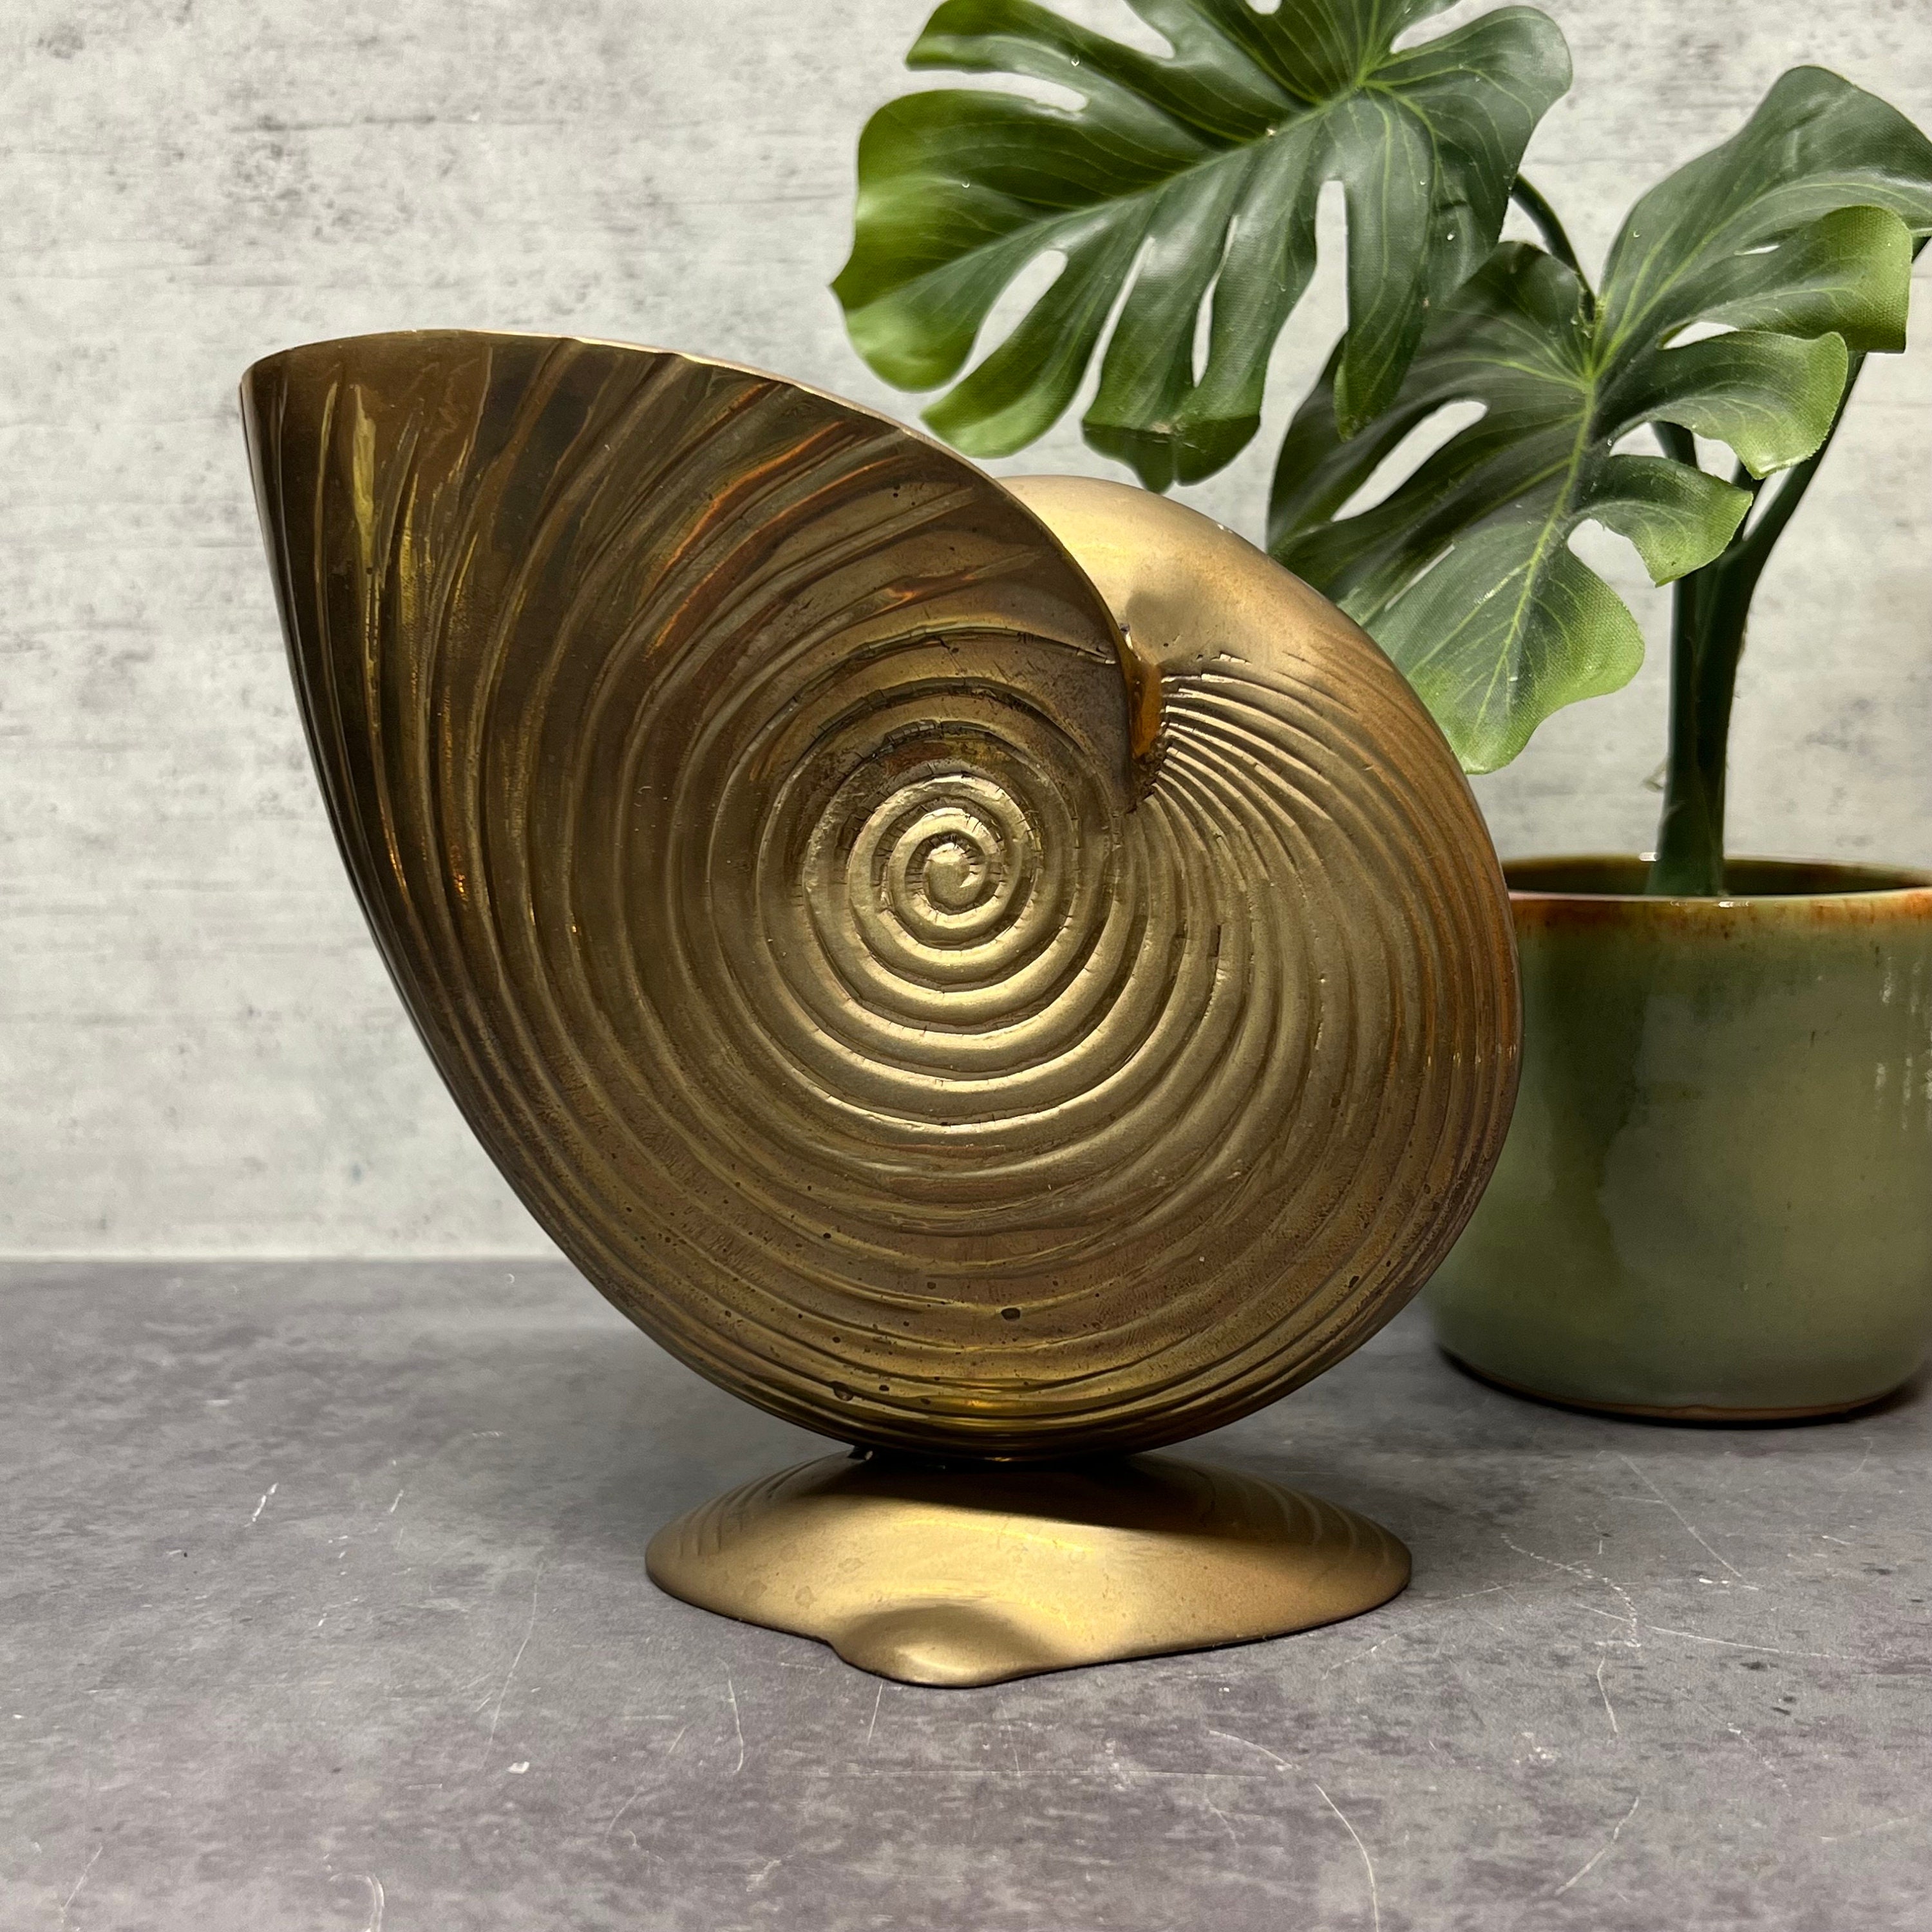 Small Brass Seashell Planter, Made in India, 1980s Solid Brass Decor,  Coastal Vibes -  UK